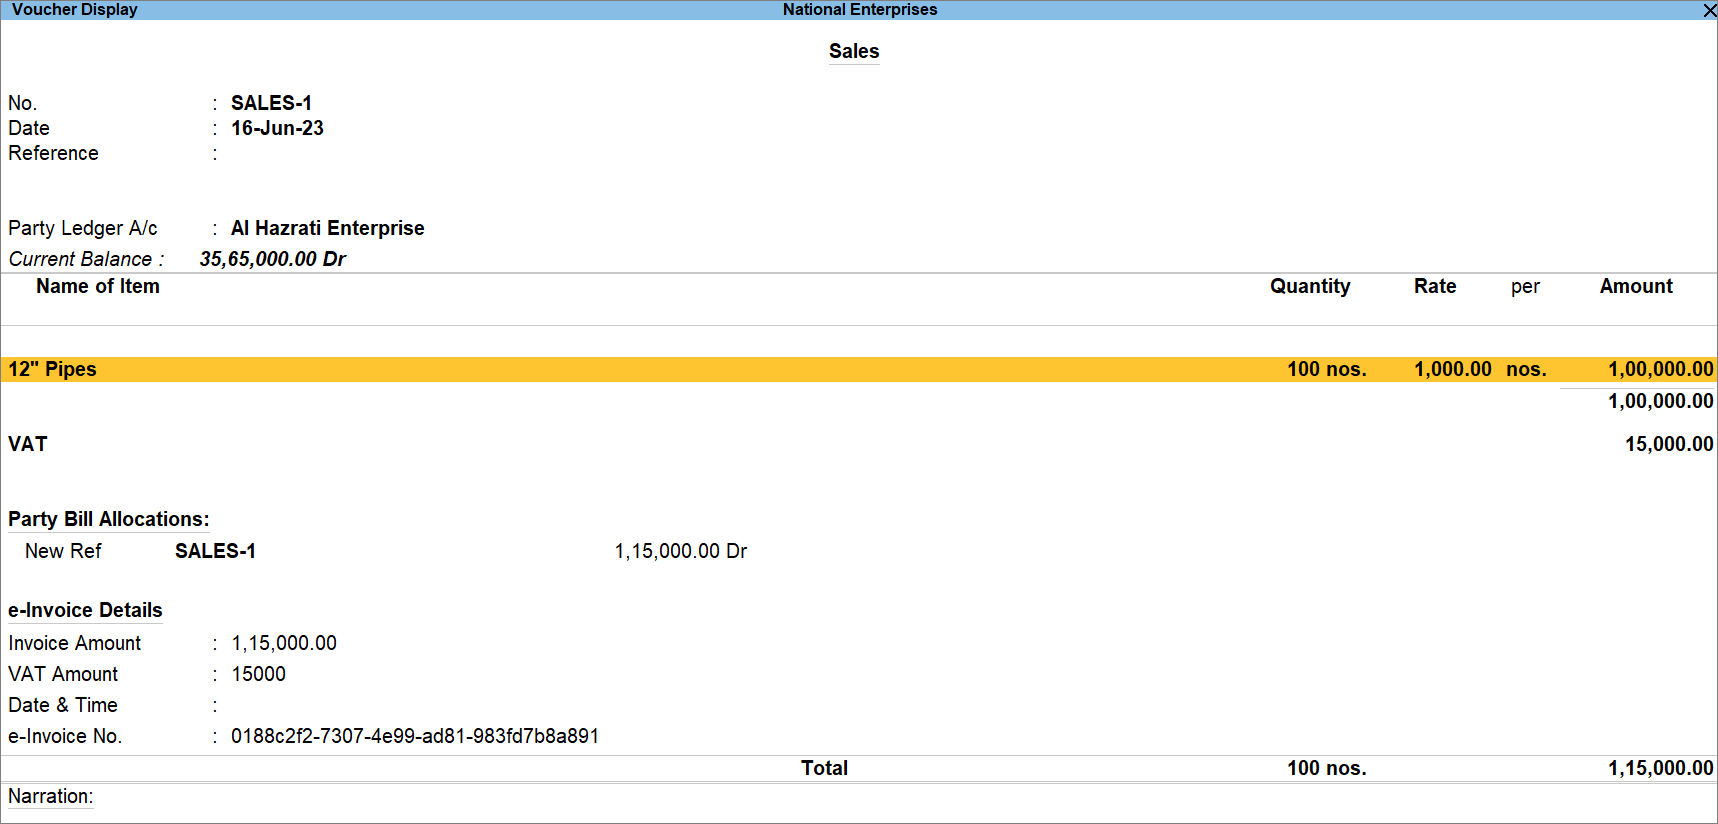 e-Invoice Details in Voucher Display Mode in TallyPrime